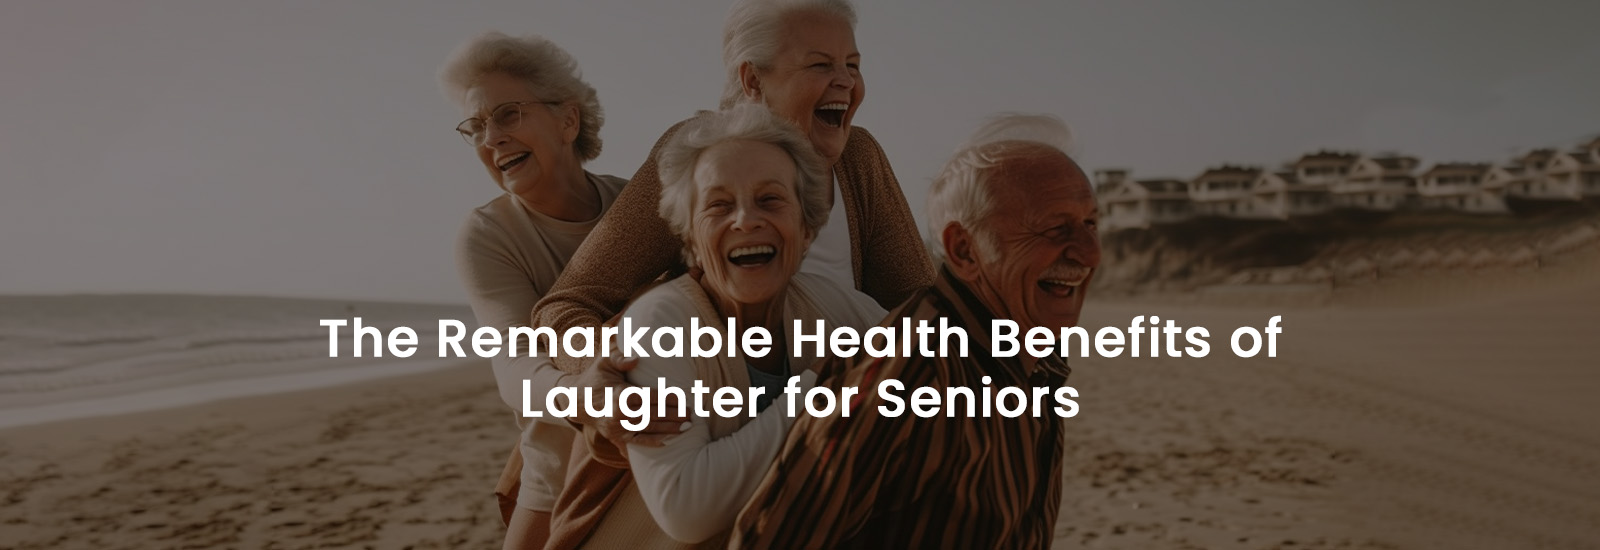 The Remarkable Health Benefits of Laughter for Seniors | Banner Image